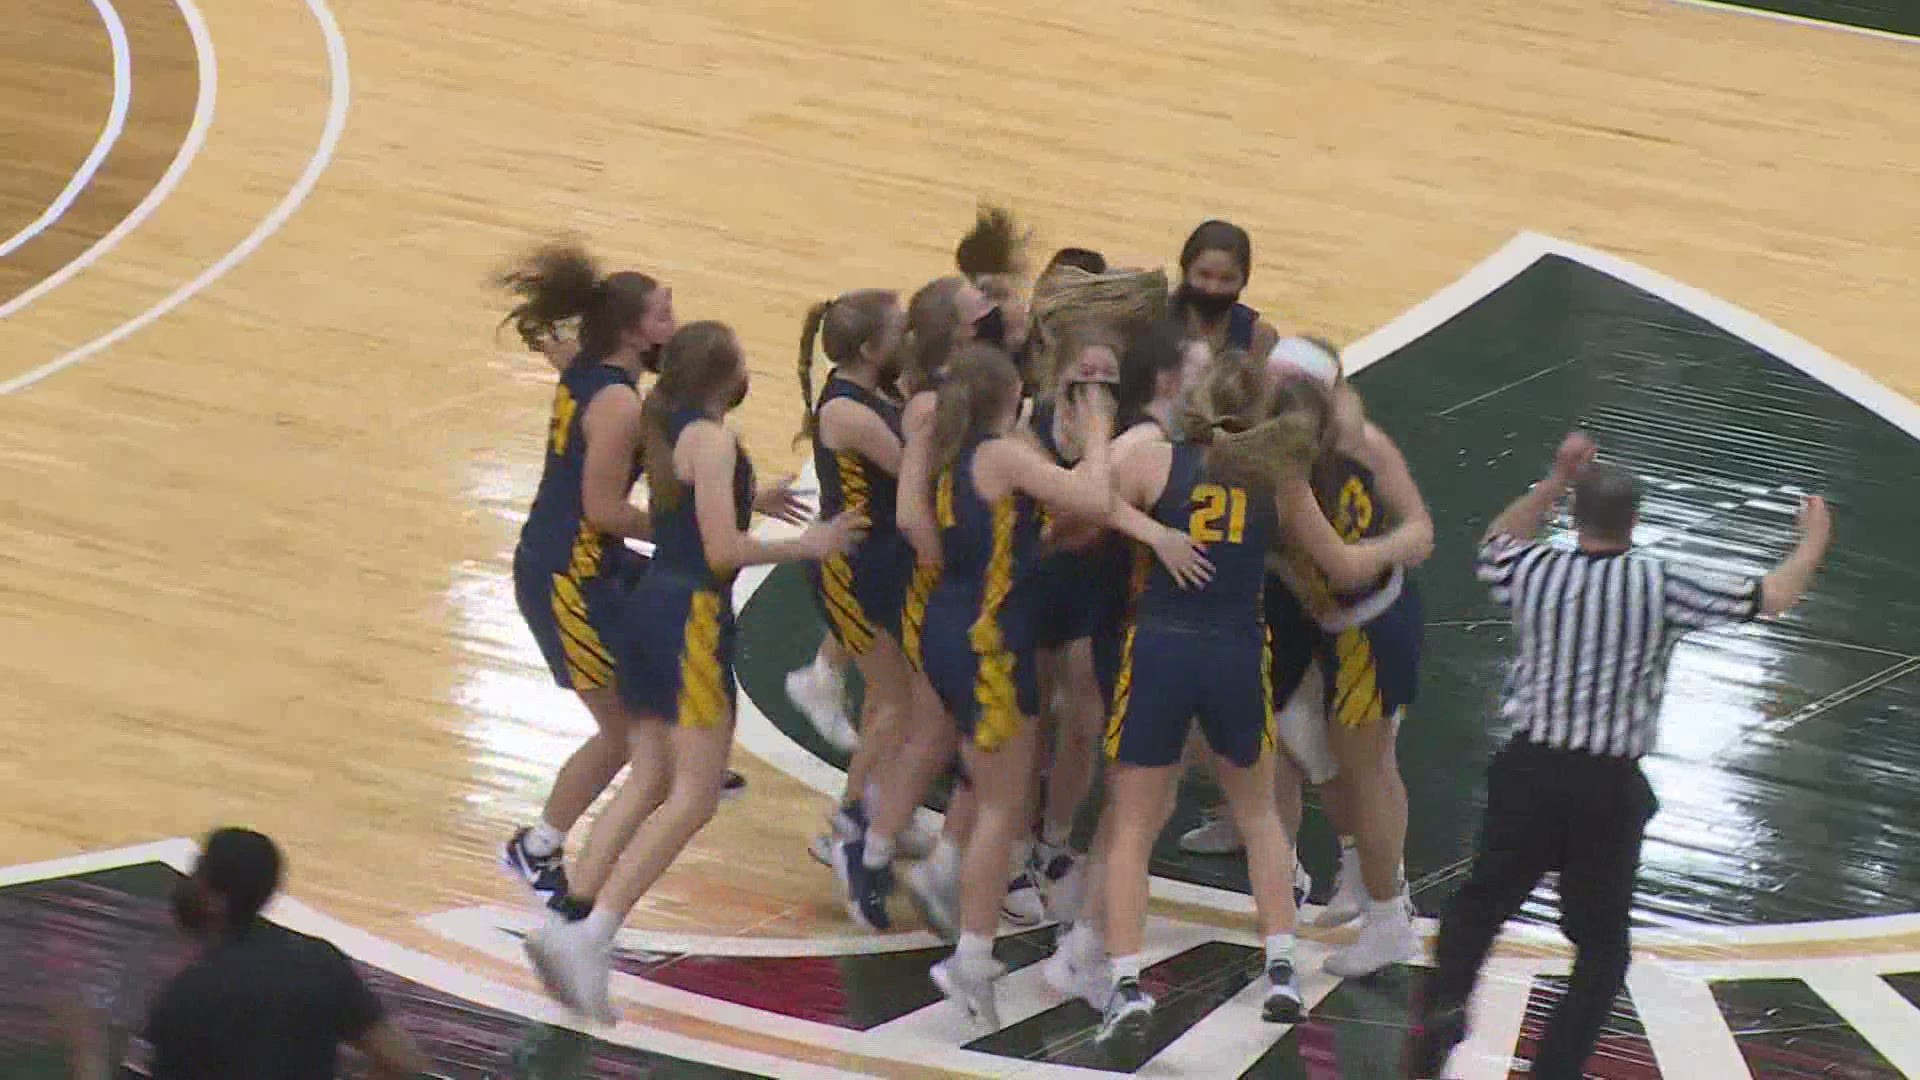 Hudsonville hangs on for its first state title ever. 65-61 the final.